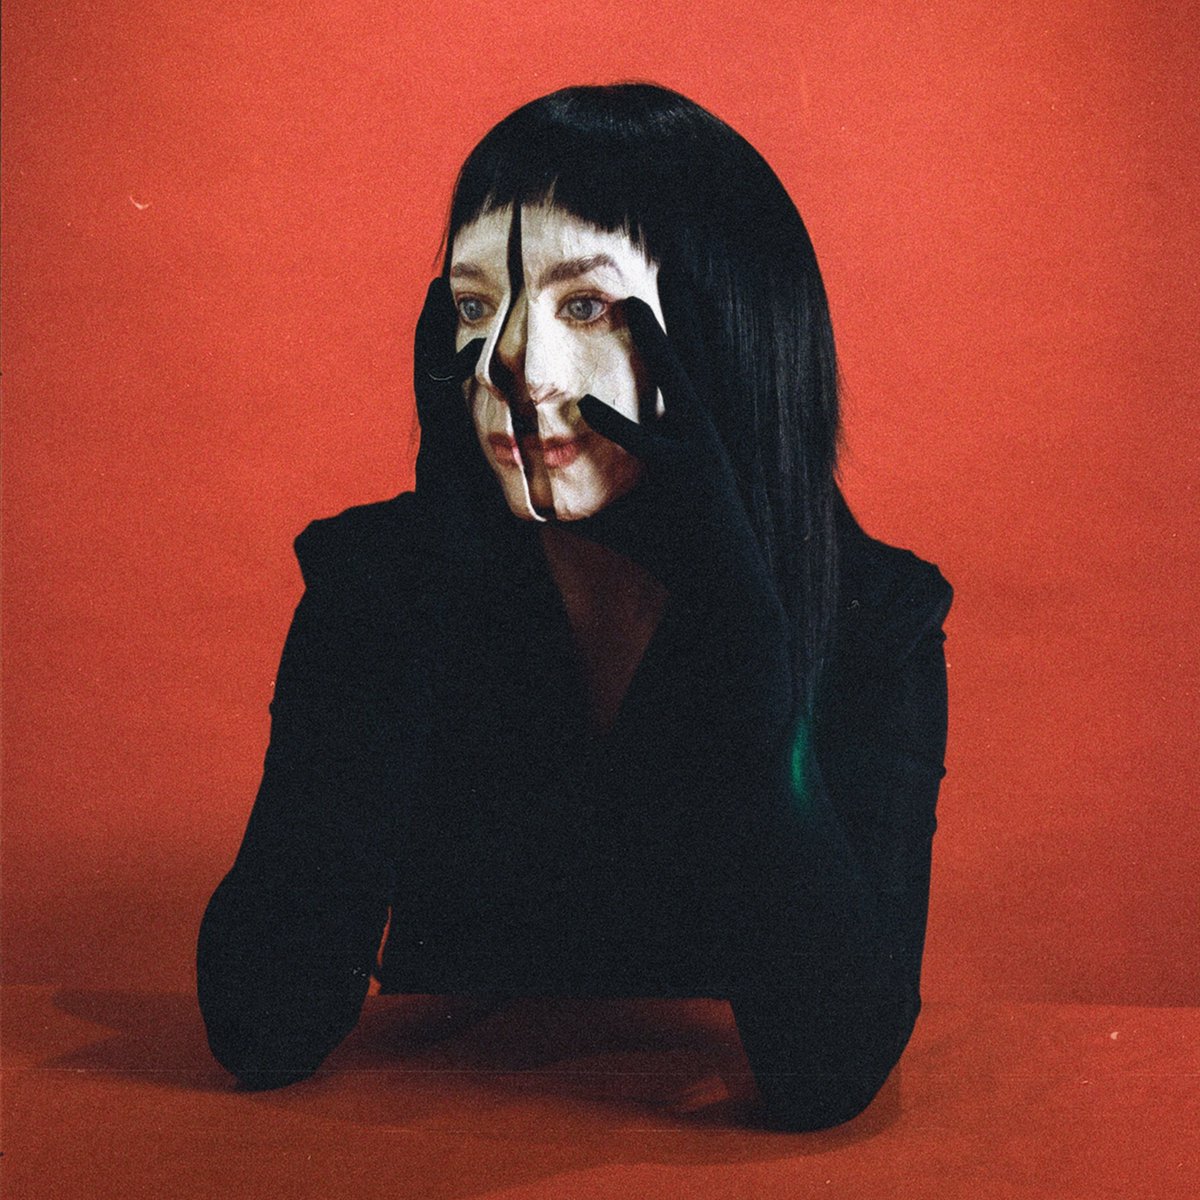 GIRL WITH NO FACE- My new album 🖤 OUT FEB 23 2024 Pre order LP, CD, Cassette and Merch here alliex.ffm.to/girlwithnoface